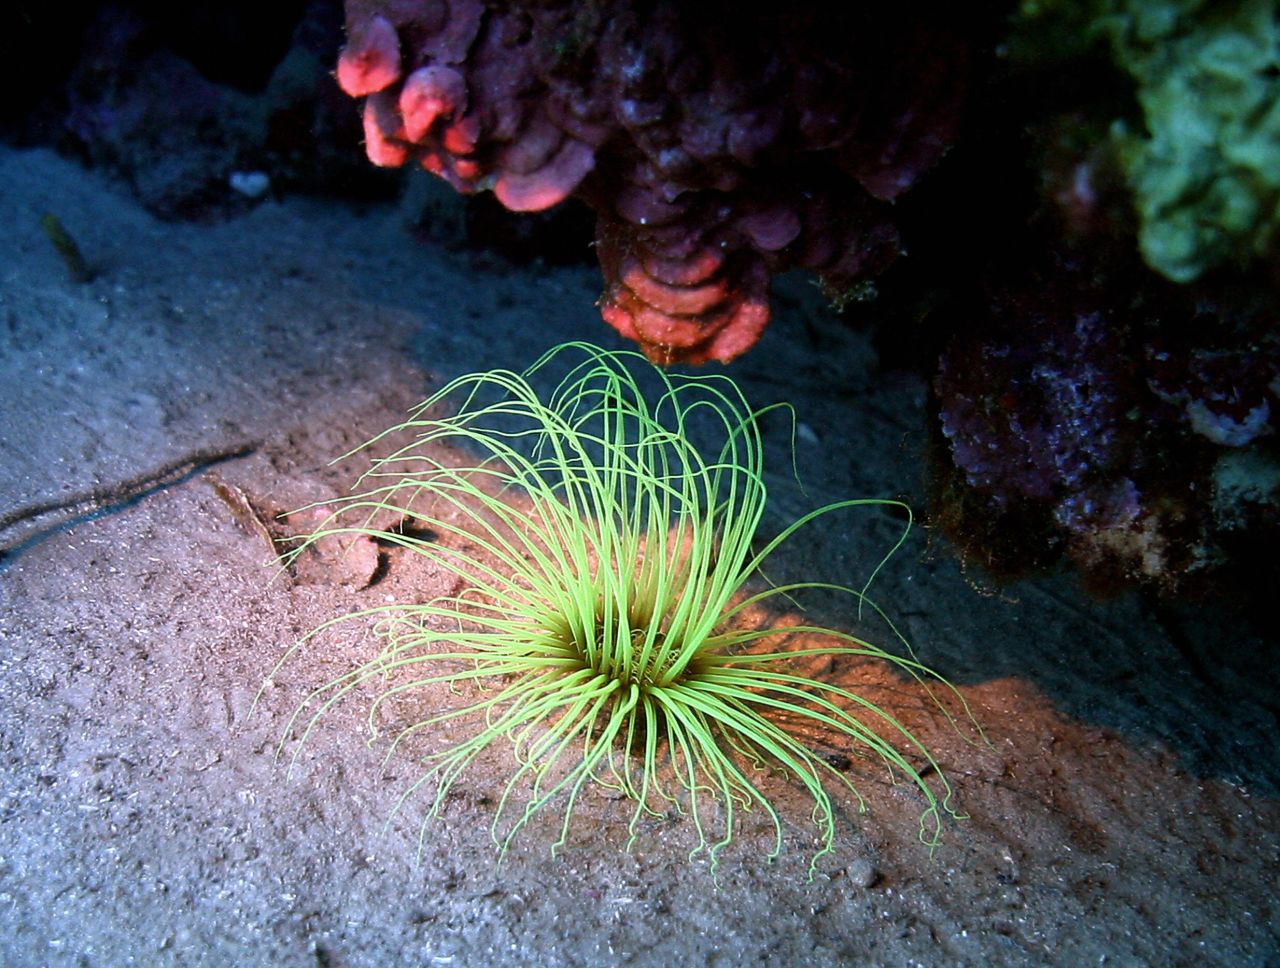 Toxins produced by sea anemones have been in trials for a drug to treat autoimmune diseases, where the immune system attacks certain cells in the body by mistaking them for invaders.